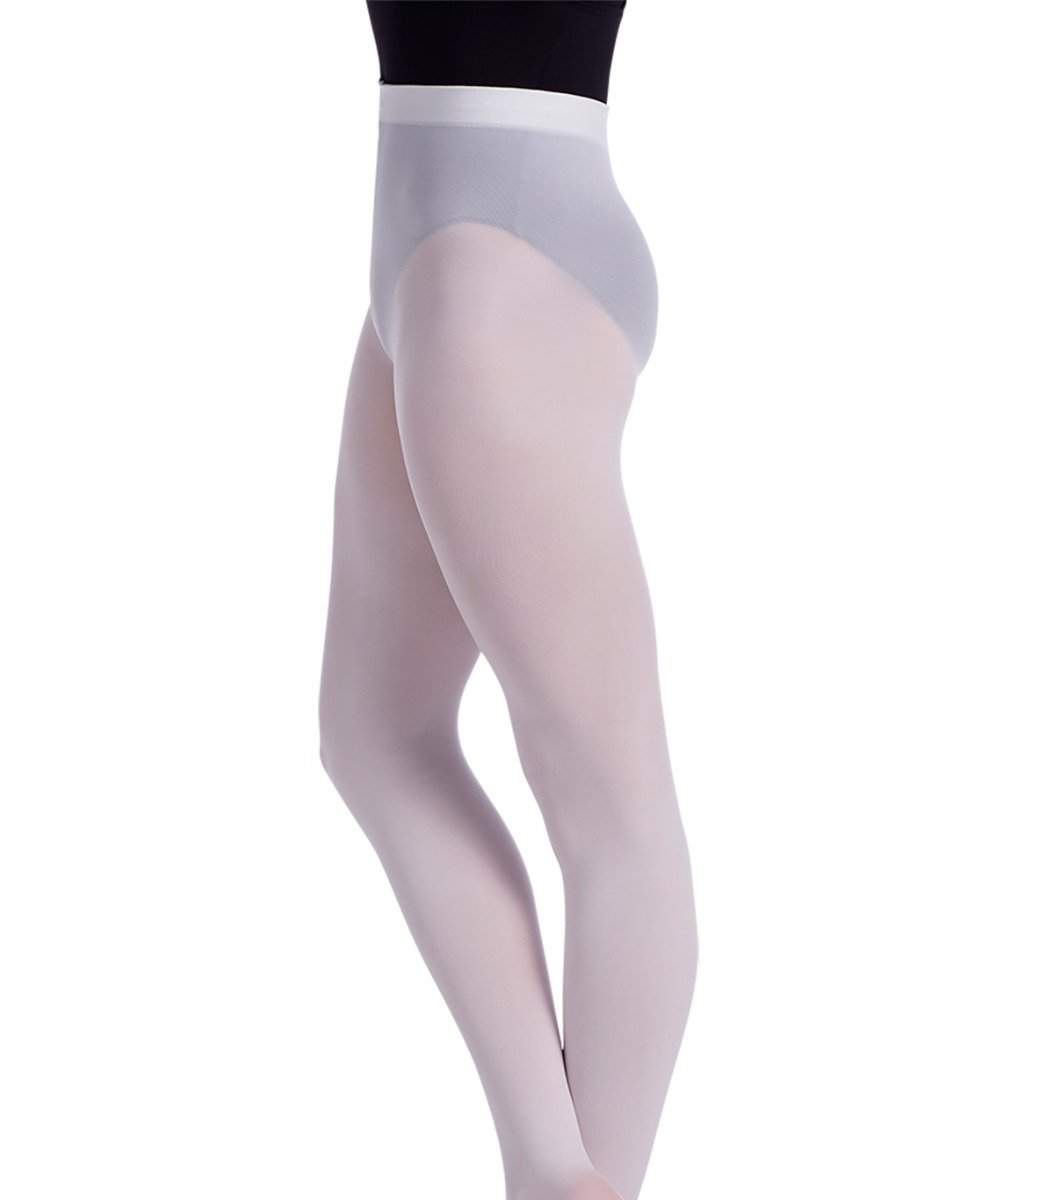  BLOCH Ballet Leggings Tights Footless Tights for Men Boys Men  : Clothing, Shoes & Jewelry